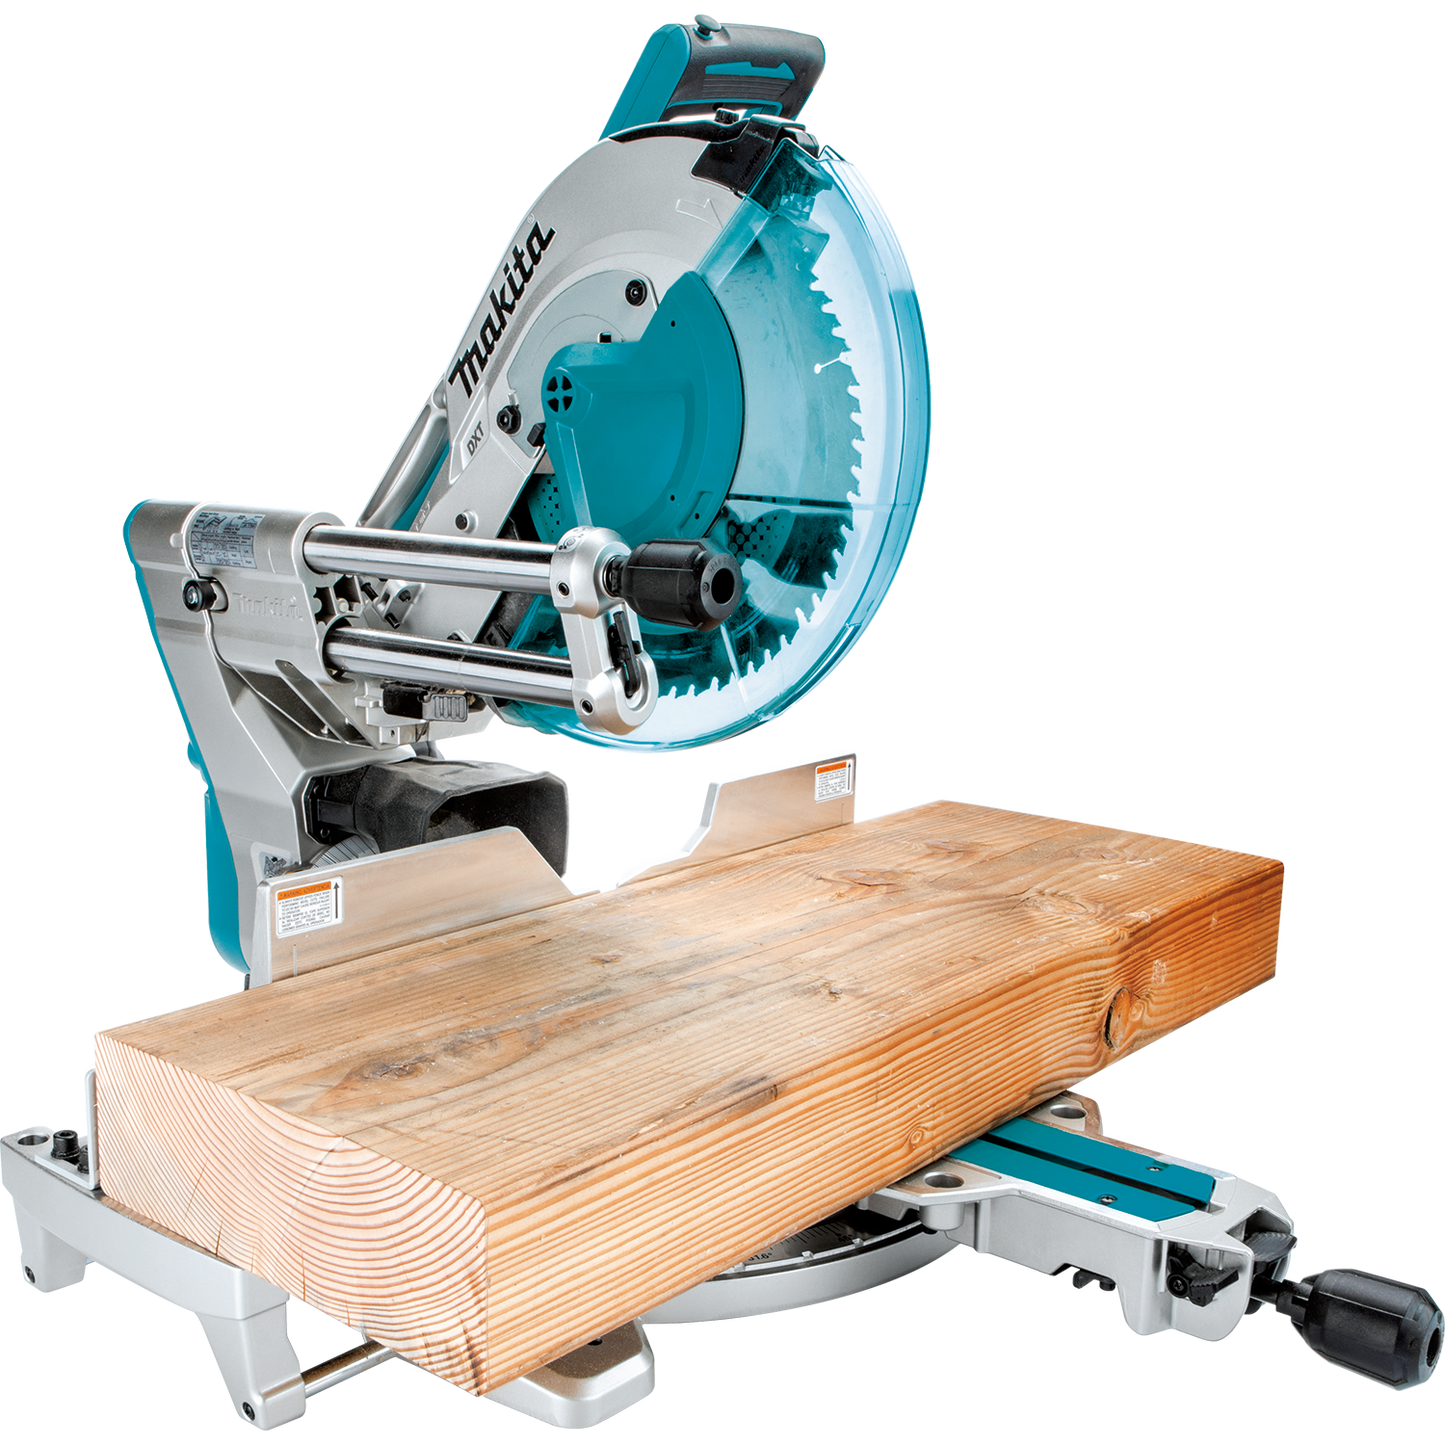 Makita 36 Volt LXT Brushless 12 Inch Dual Bevel Sliding Compound Miter Saw Capable And Laser Factory Serviced (Tool Only)